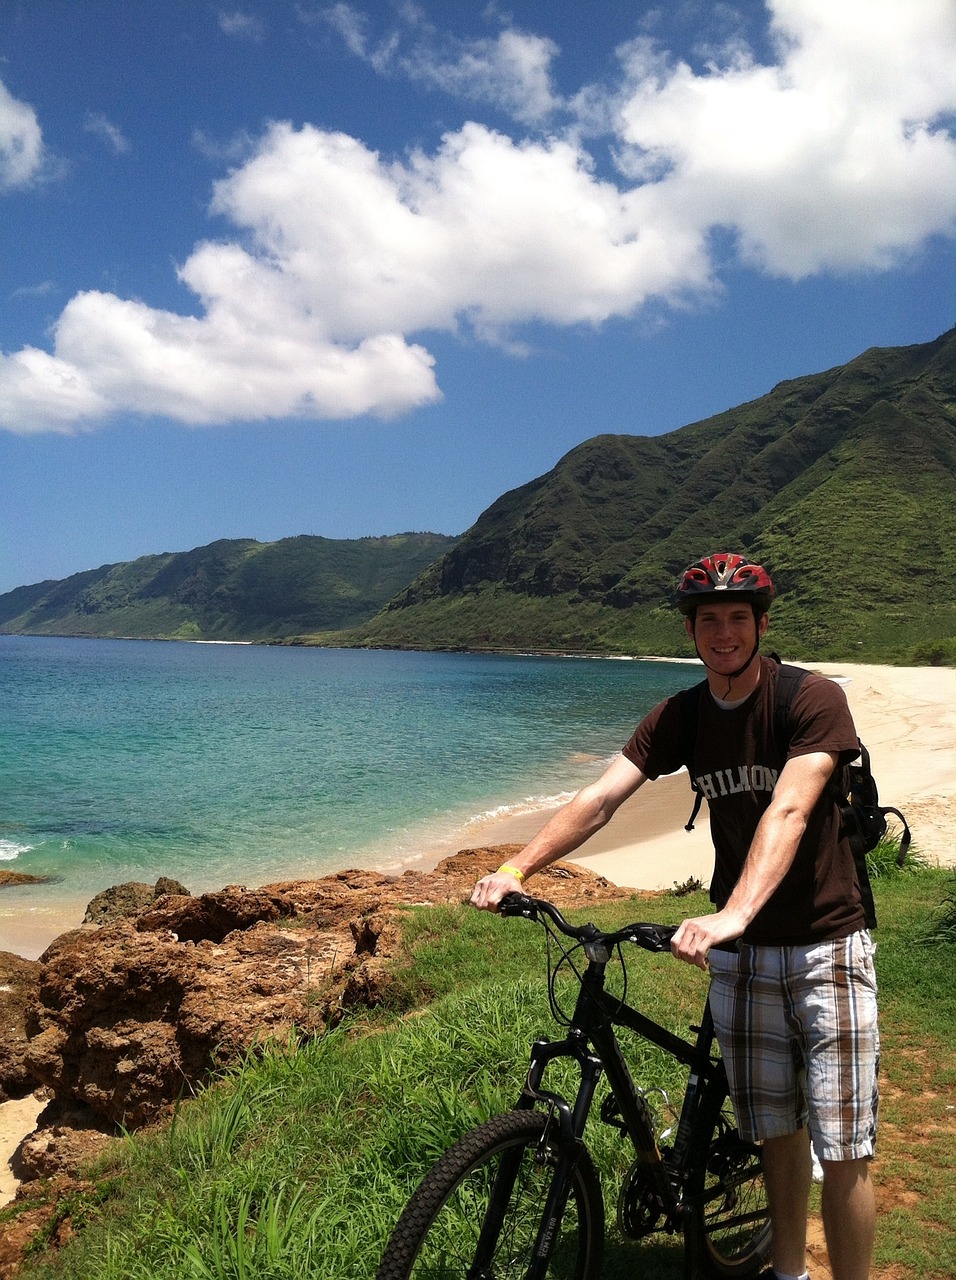 4 Great Tips for an Awesome Hawaiian Vacation